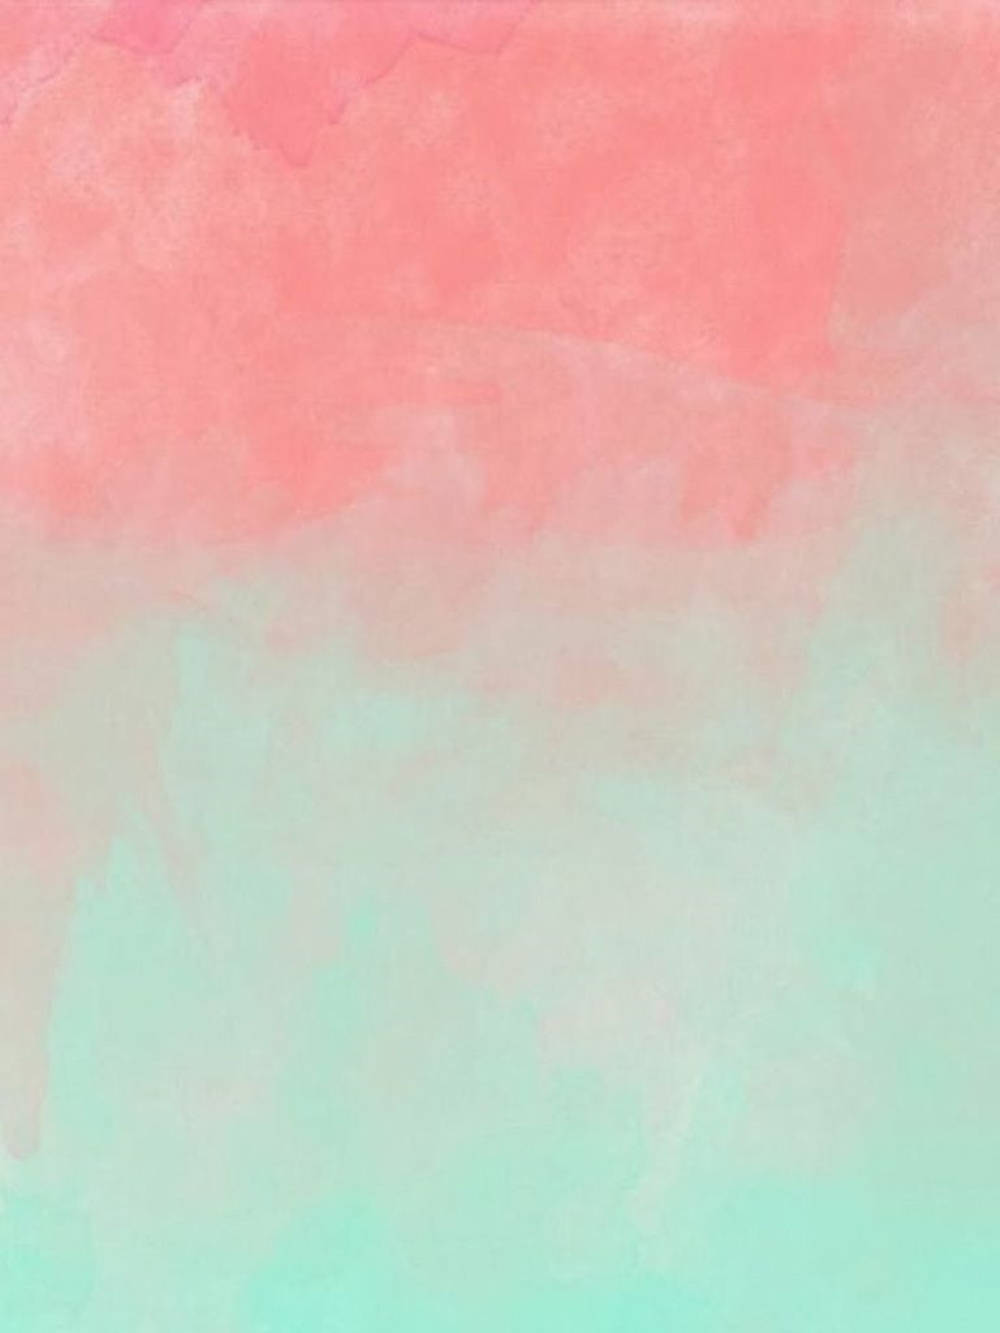 Pastel Ipad Gradient Coral And Mint Green